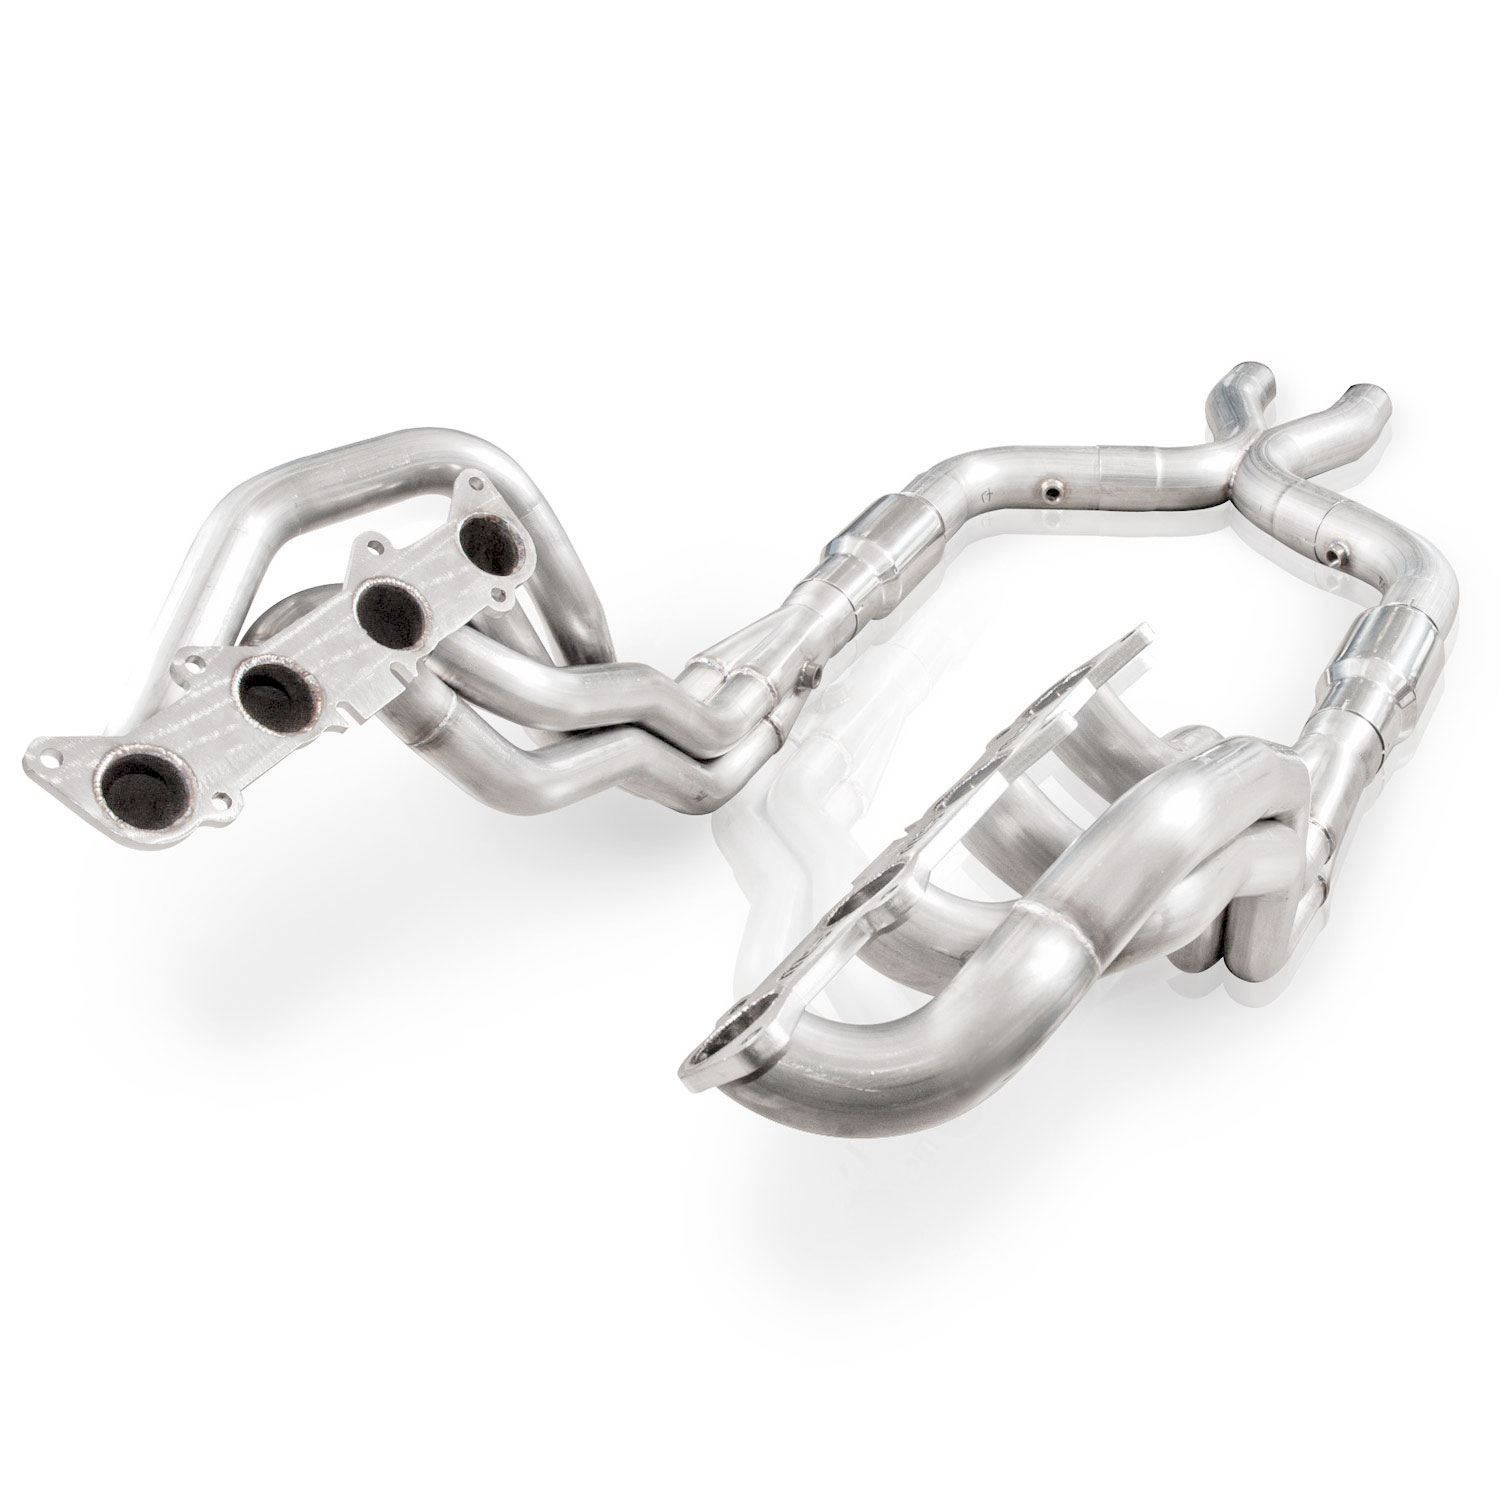 2011-2014 Mustang GT 5.0L Stainless Power Headers 1-7/8" With Catted Leads Factory Connect